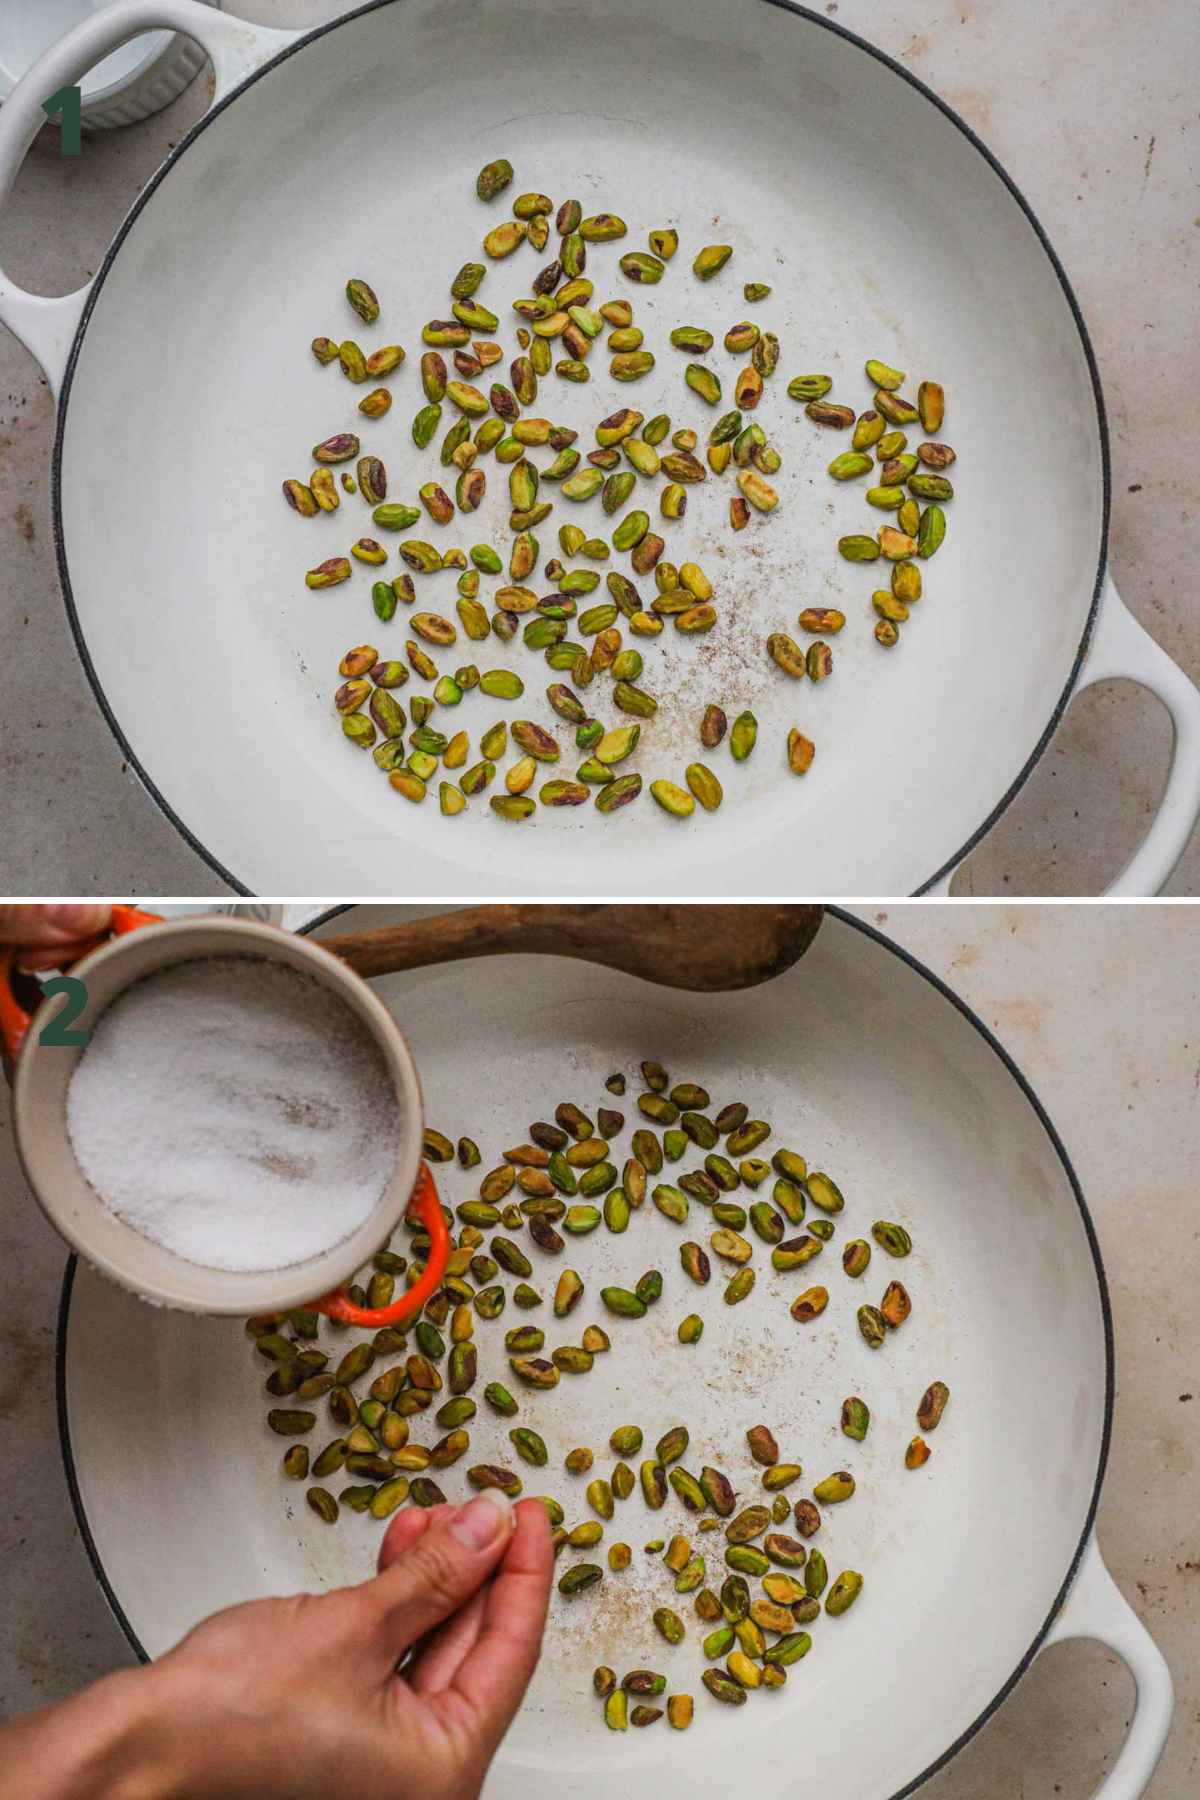 Steps to make roasted pistachios, add pistachios to a pan, cook until toasted, and season with salt.